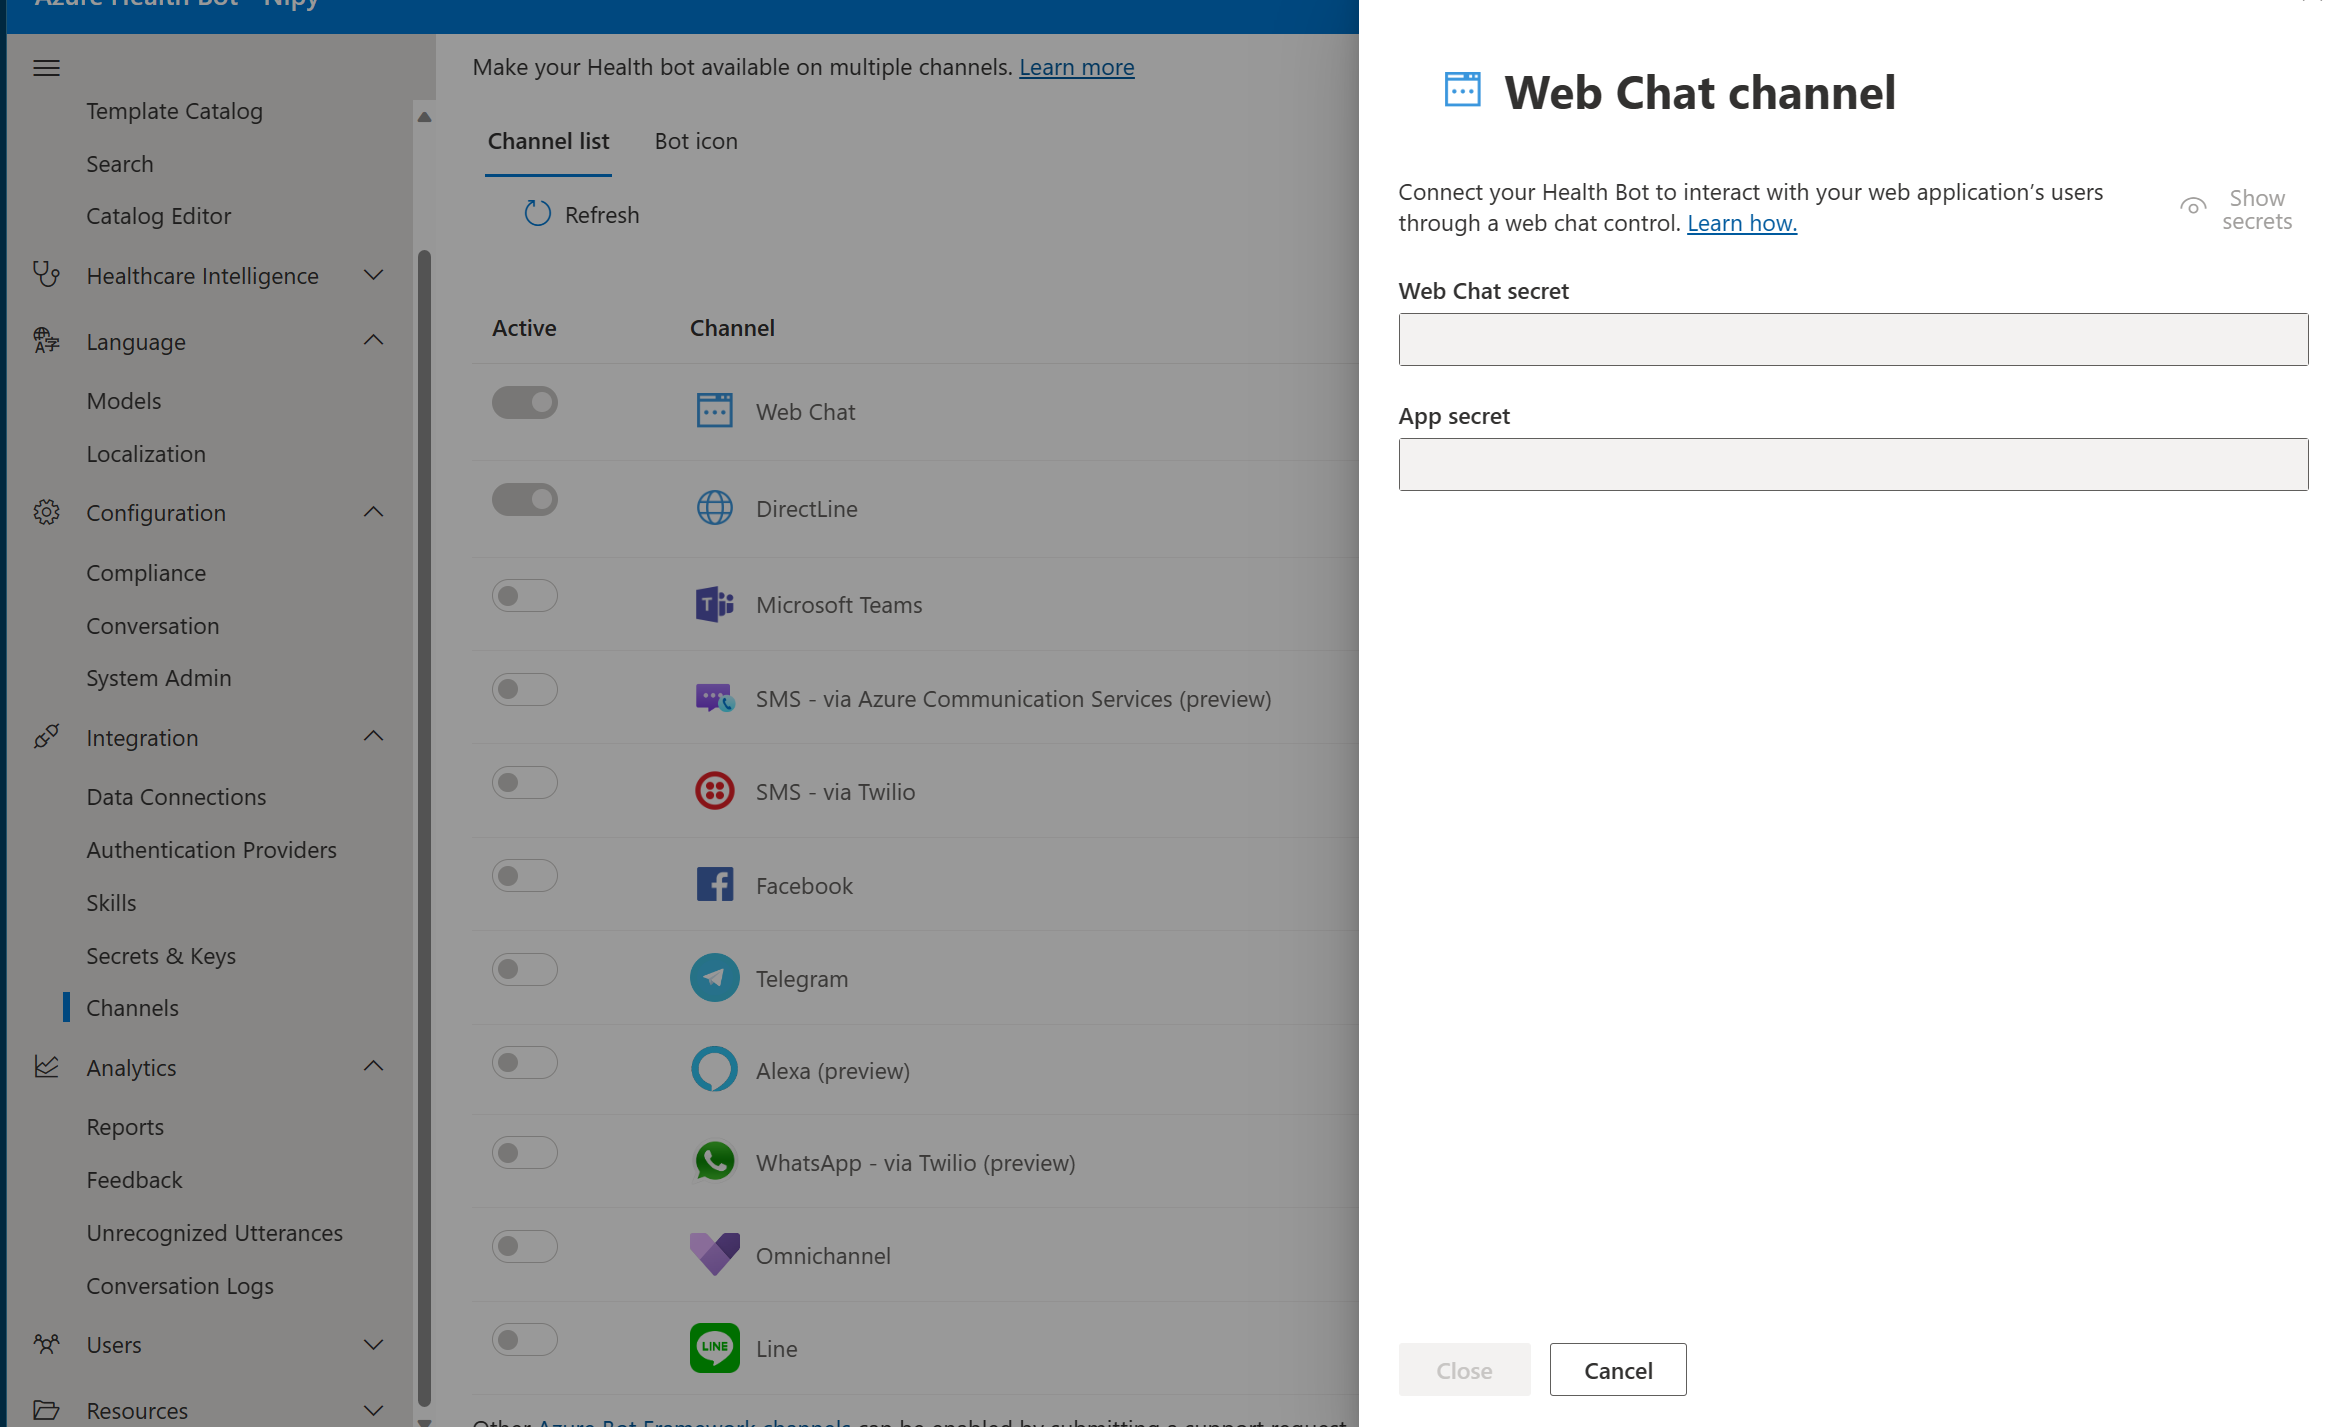 A screenshot of the webchat channel